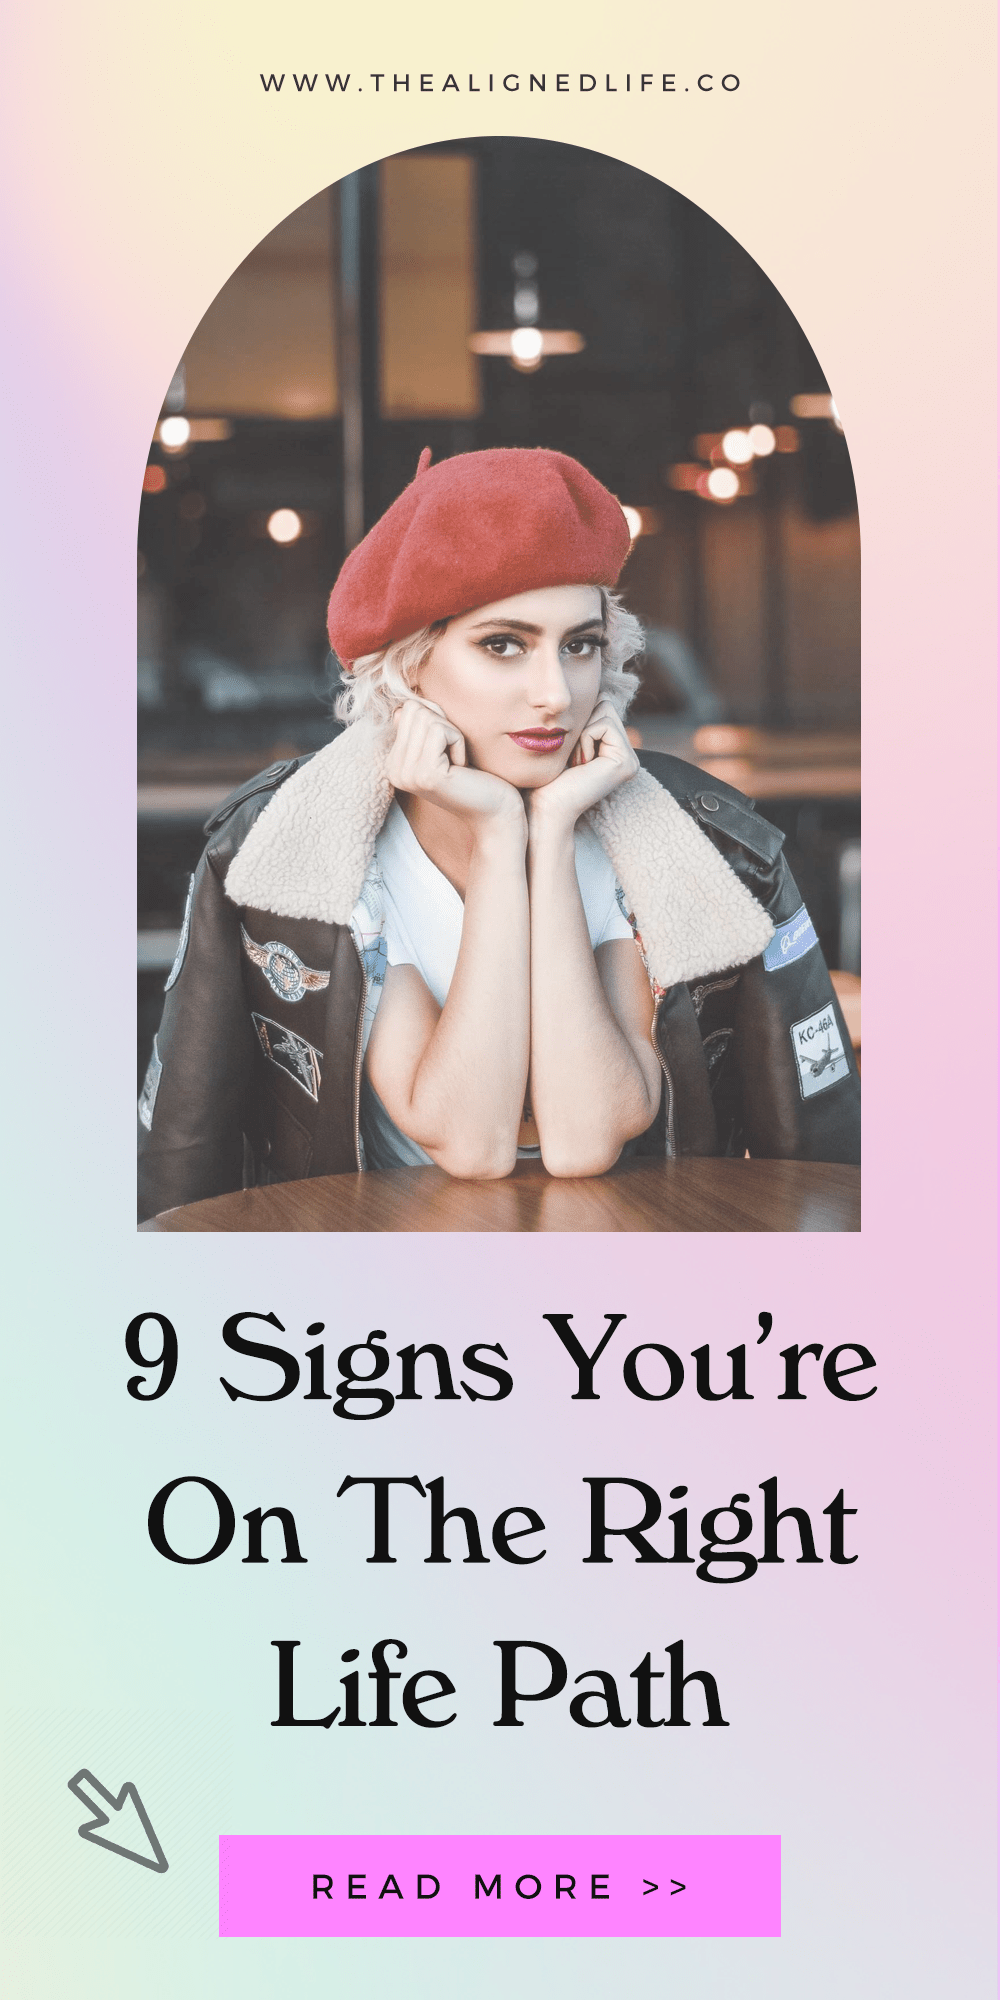 woman with head on hands & text 9 Signs You're On The Right Life Path